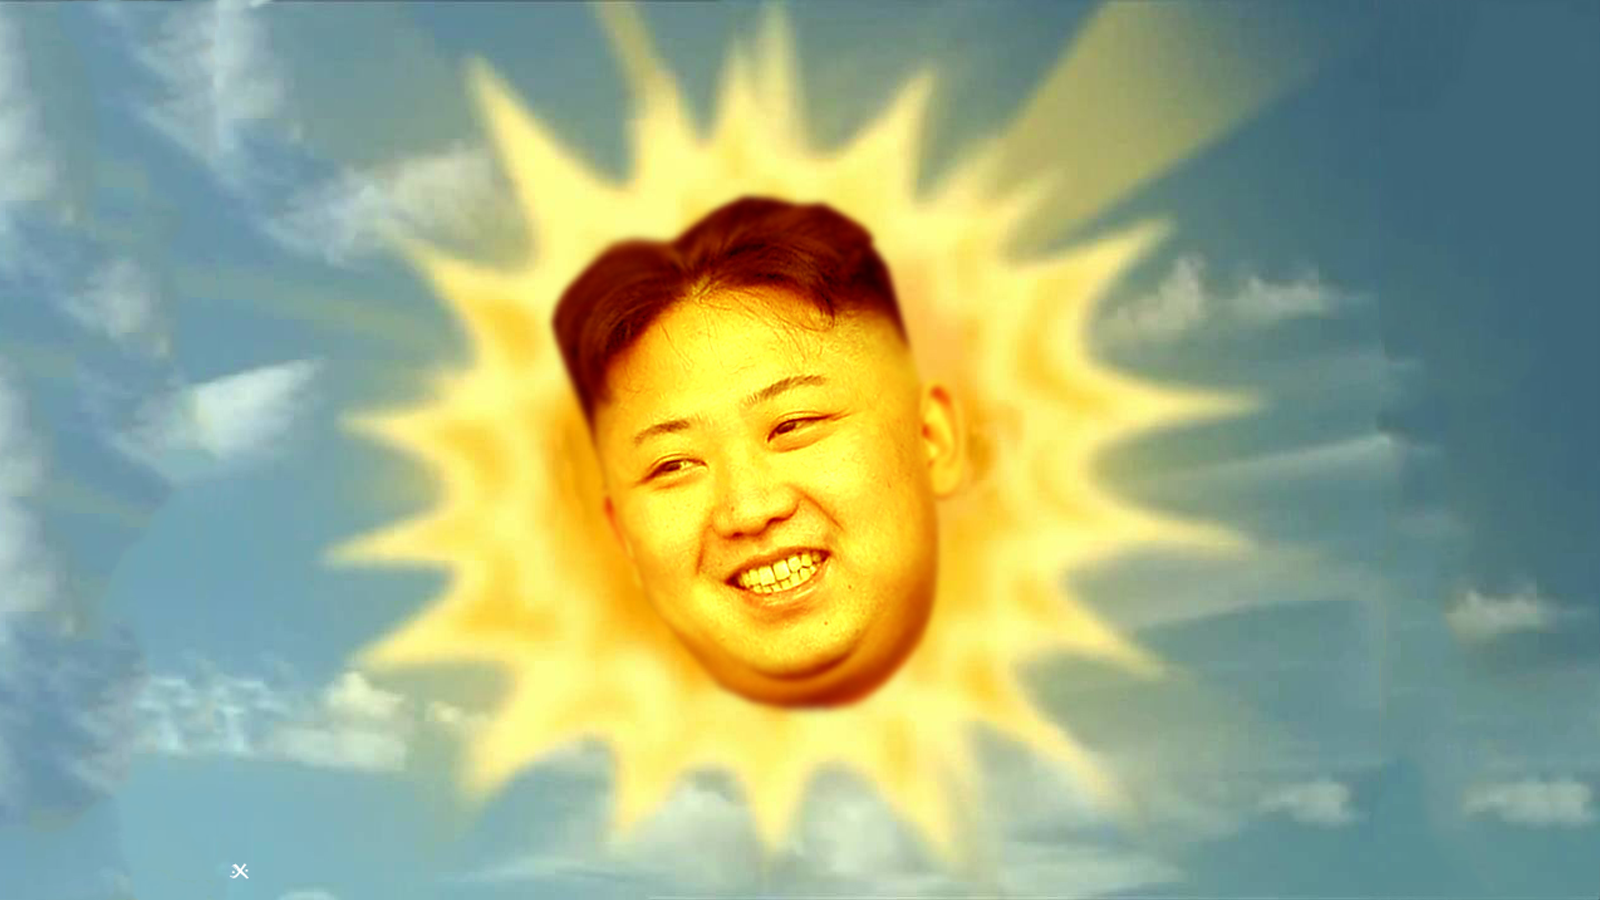 Students Upset Discover Yearbook Altered Show Skin - Kim Jong Un As The Sun , HD Wallpaper & Backgrounds